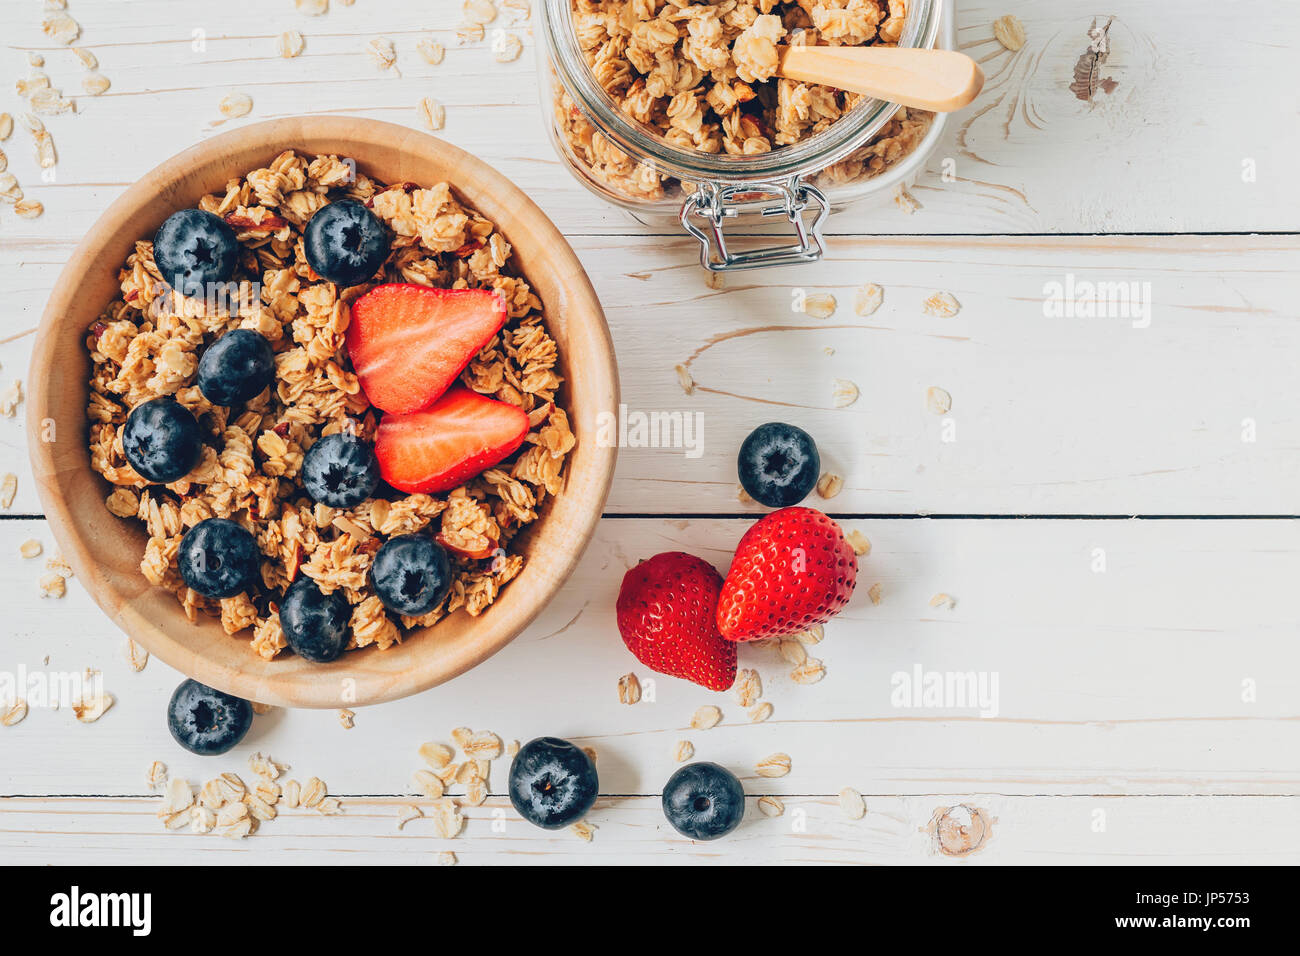 Homemade granola and fresh berries on wood table with space. Stock Photo